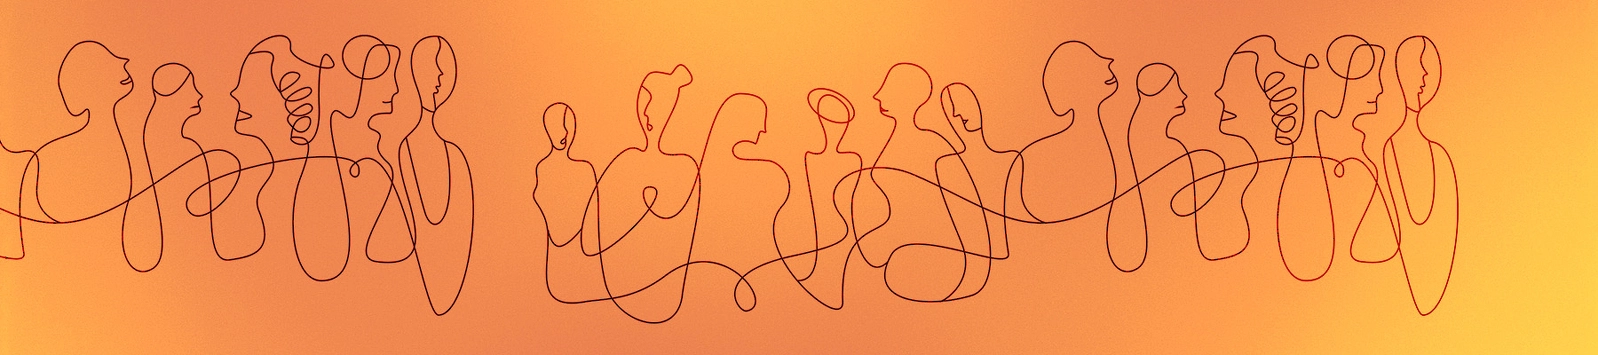 continuous line drawing of people with bright background tone